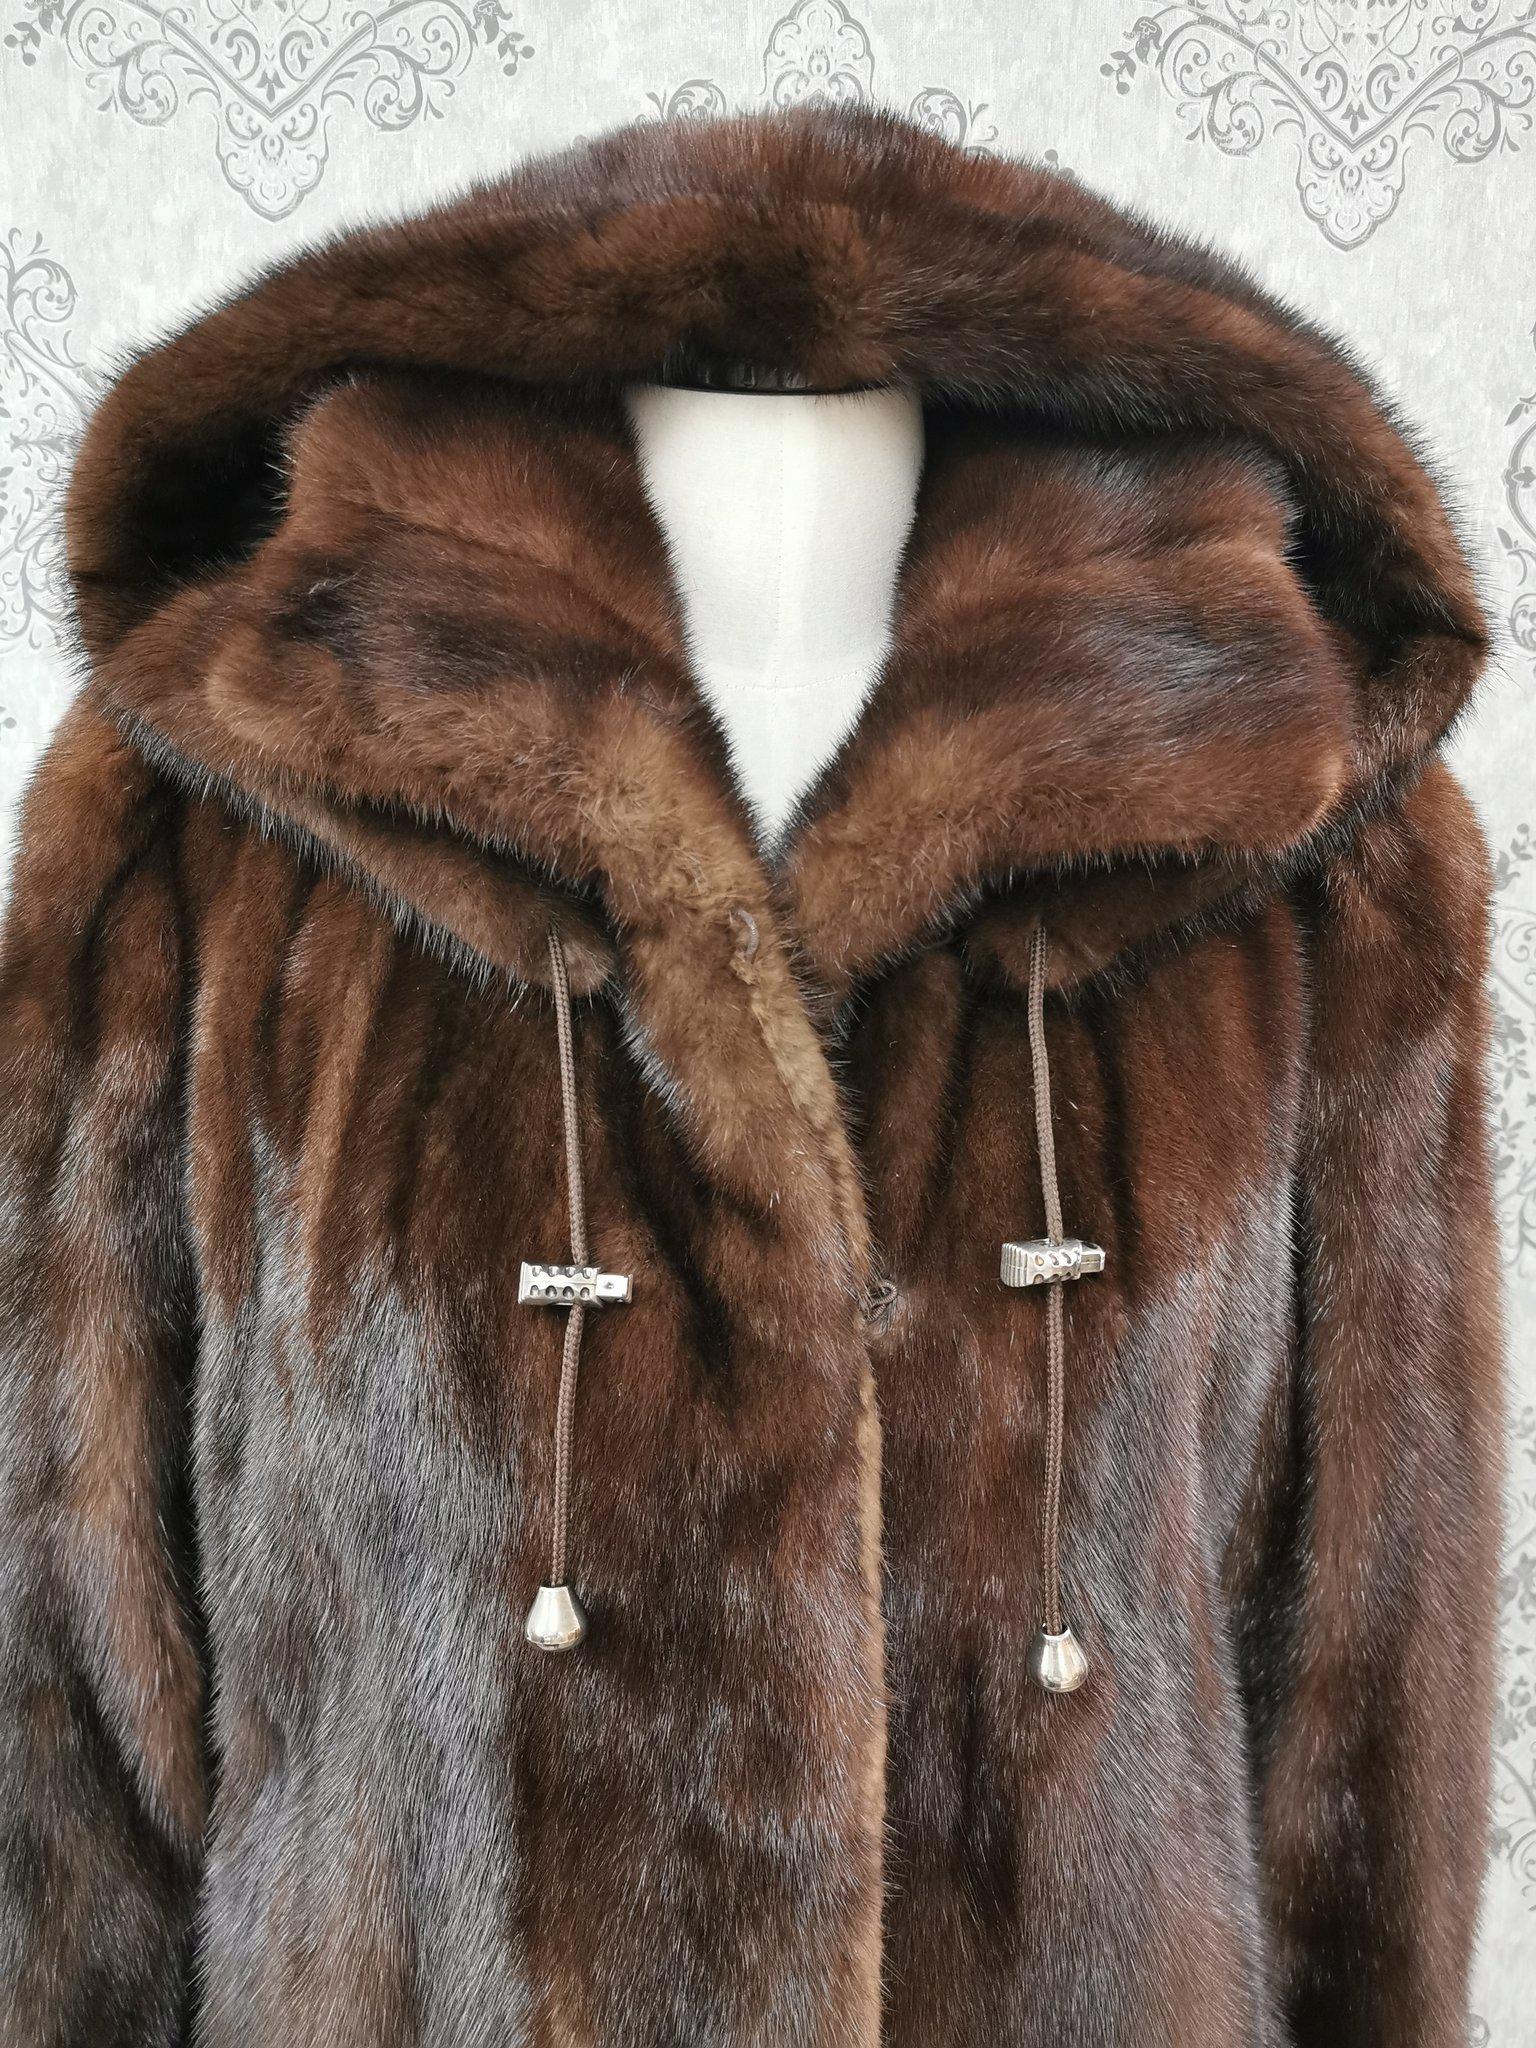 
PRODUCT DESCRIPTION:

Brand new luxurious Mink fur coat 

Condition: Brand New

Closure: Buttons

Color: Demi buff

Material: Mink

Garment type: Coat

Sleeves: Princess cuffs

Pockets: No pockets

Collar: Short

Lining: Shirred Silk satin

Made in